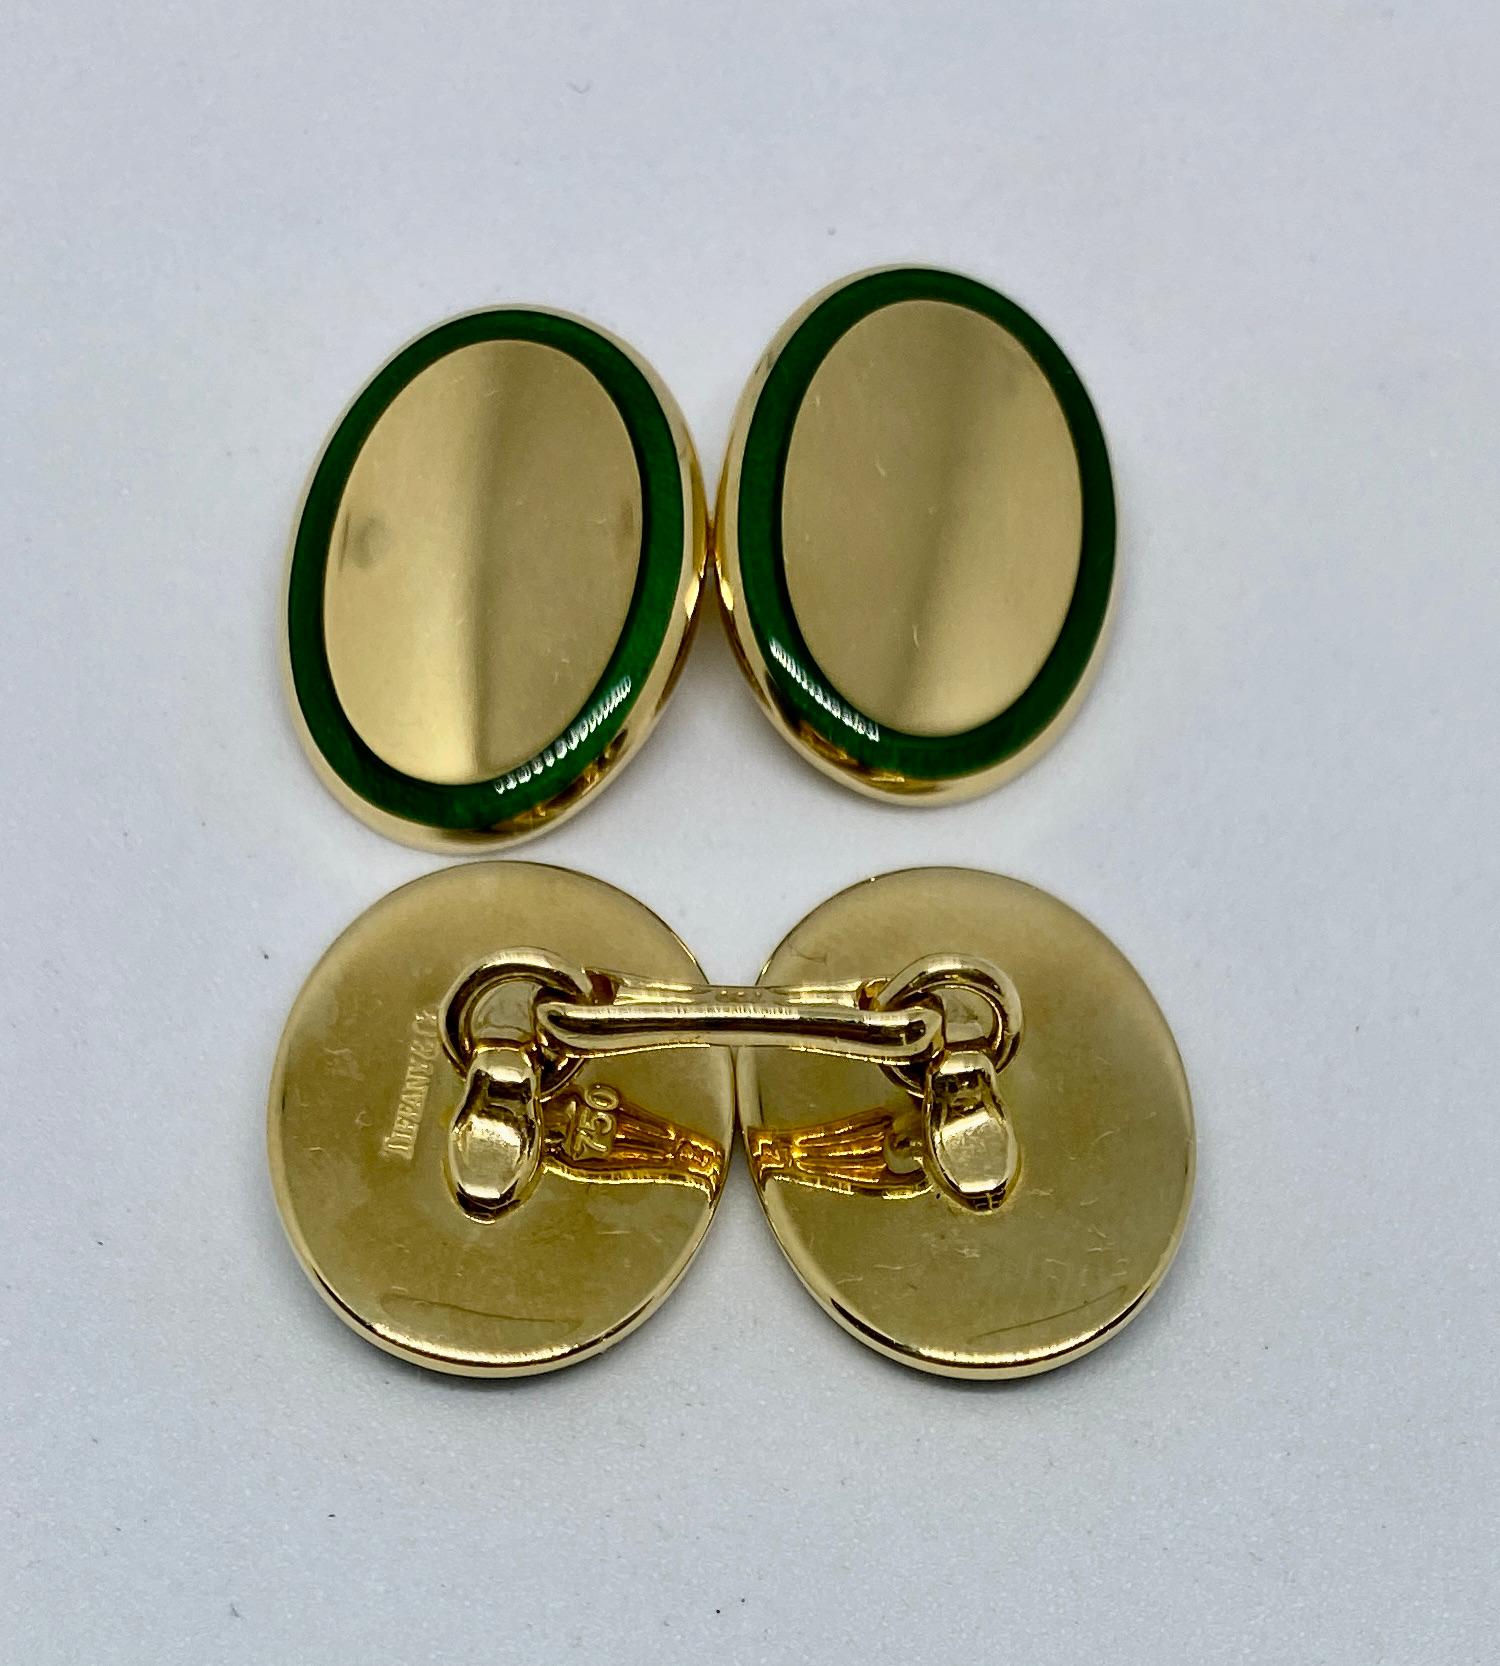 An exceptionally well-made pair of cufflinks in solid, 18K yellow gold featuring green enamel borders. 

The four oval faces each measure 18.4 by 13.9mm, and are attached to their mates with sturdy 